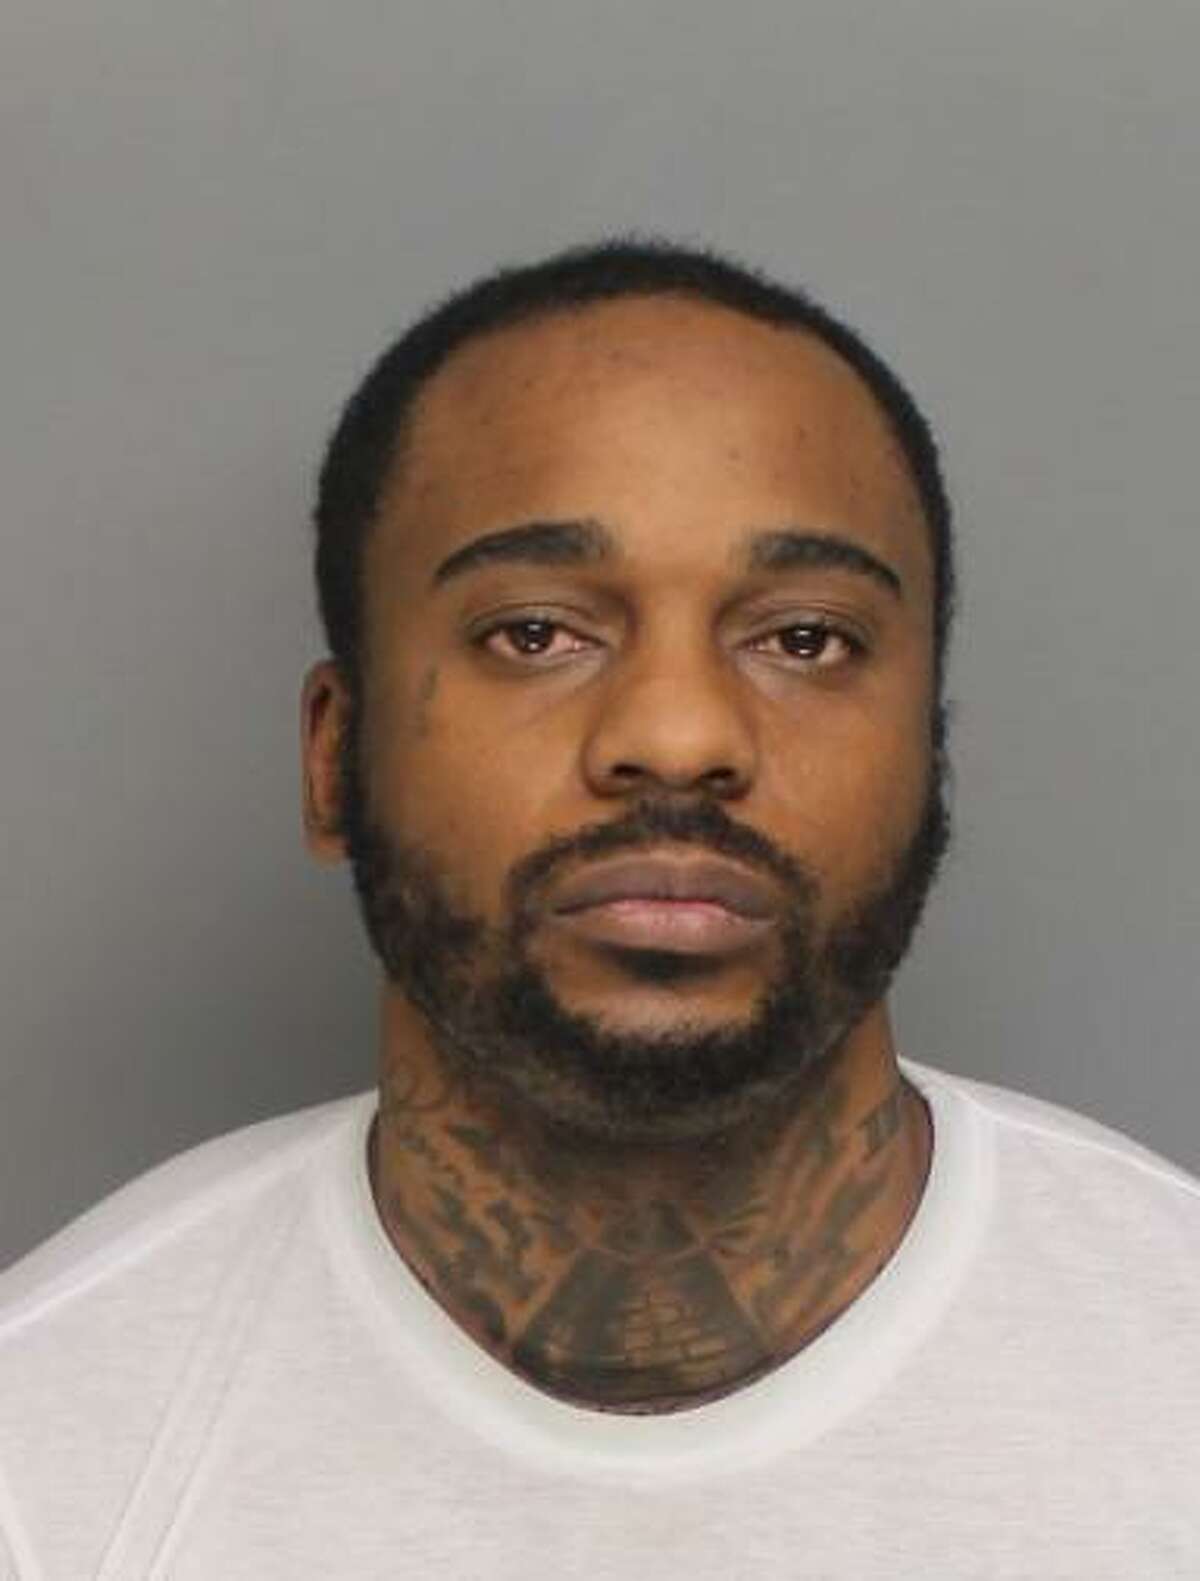 Glenn Pettway, wanted in the shooting death of a Bridgeport woman Saturday morning, is believed to be operating a blue 2002 Ford Mustang. Police said he should be considered armed and dangerous.